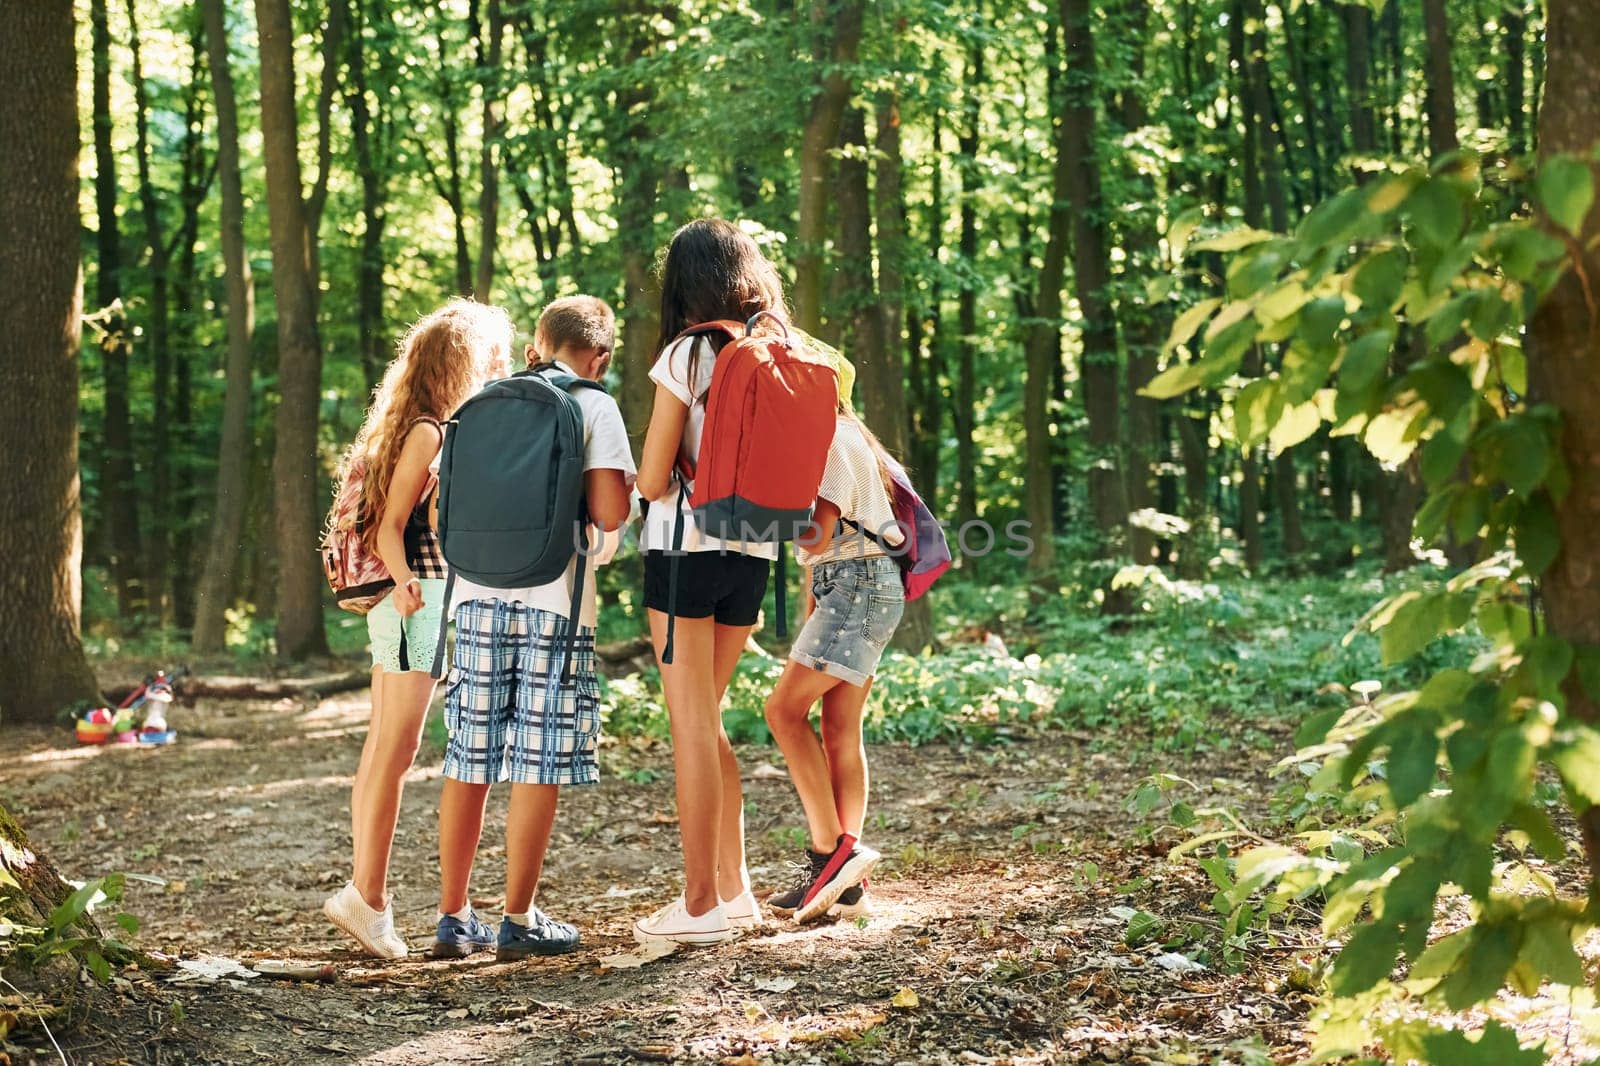 Kids strolling in the forest with travel equipment.